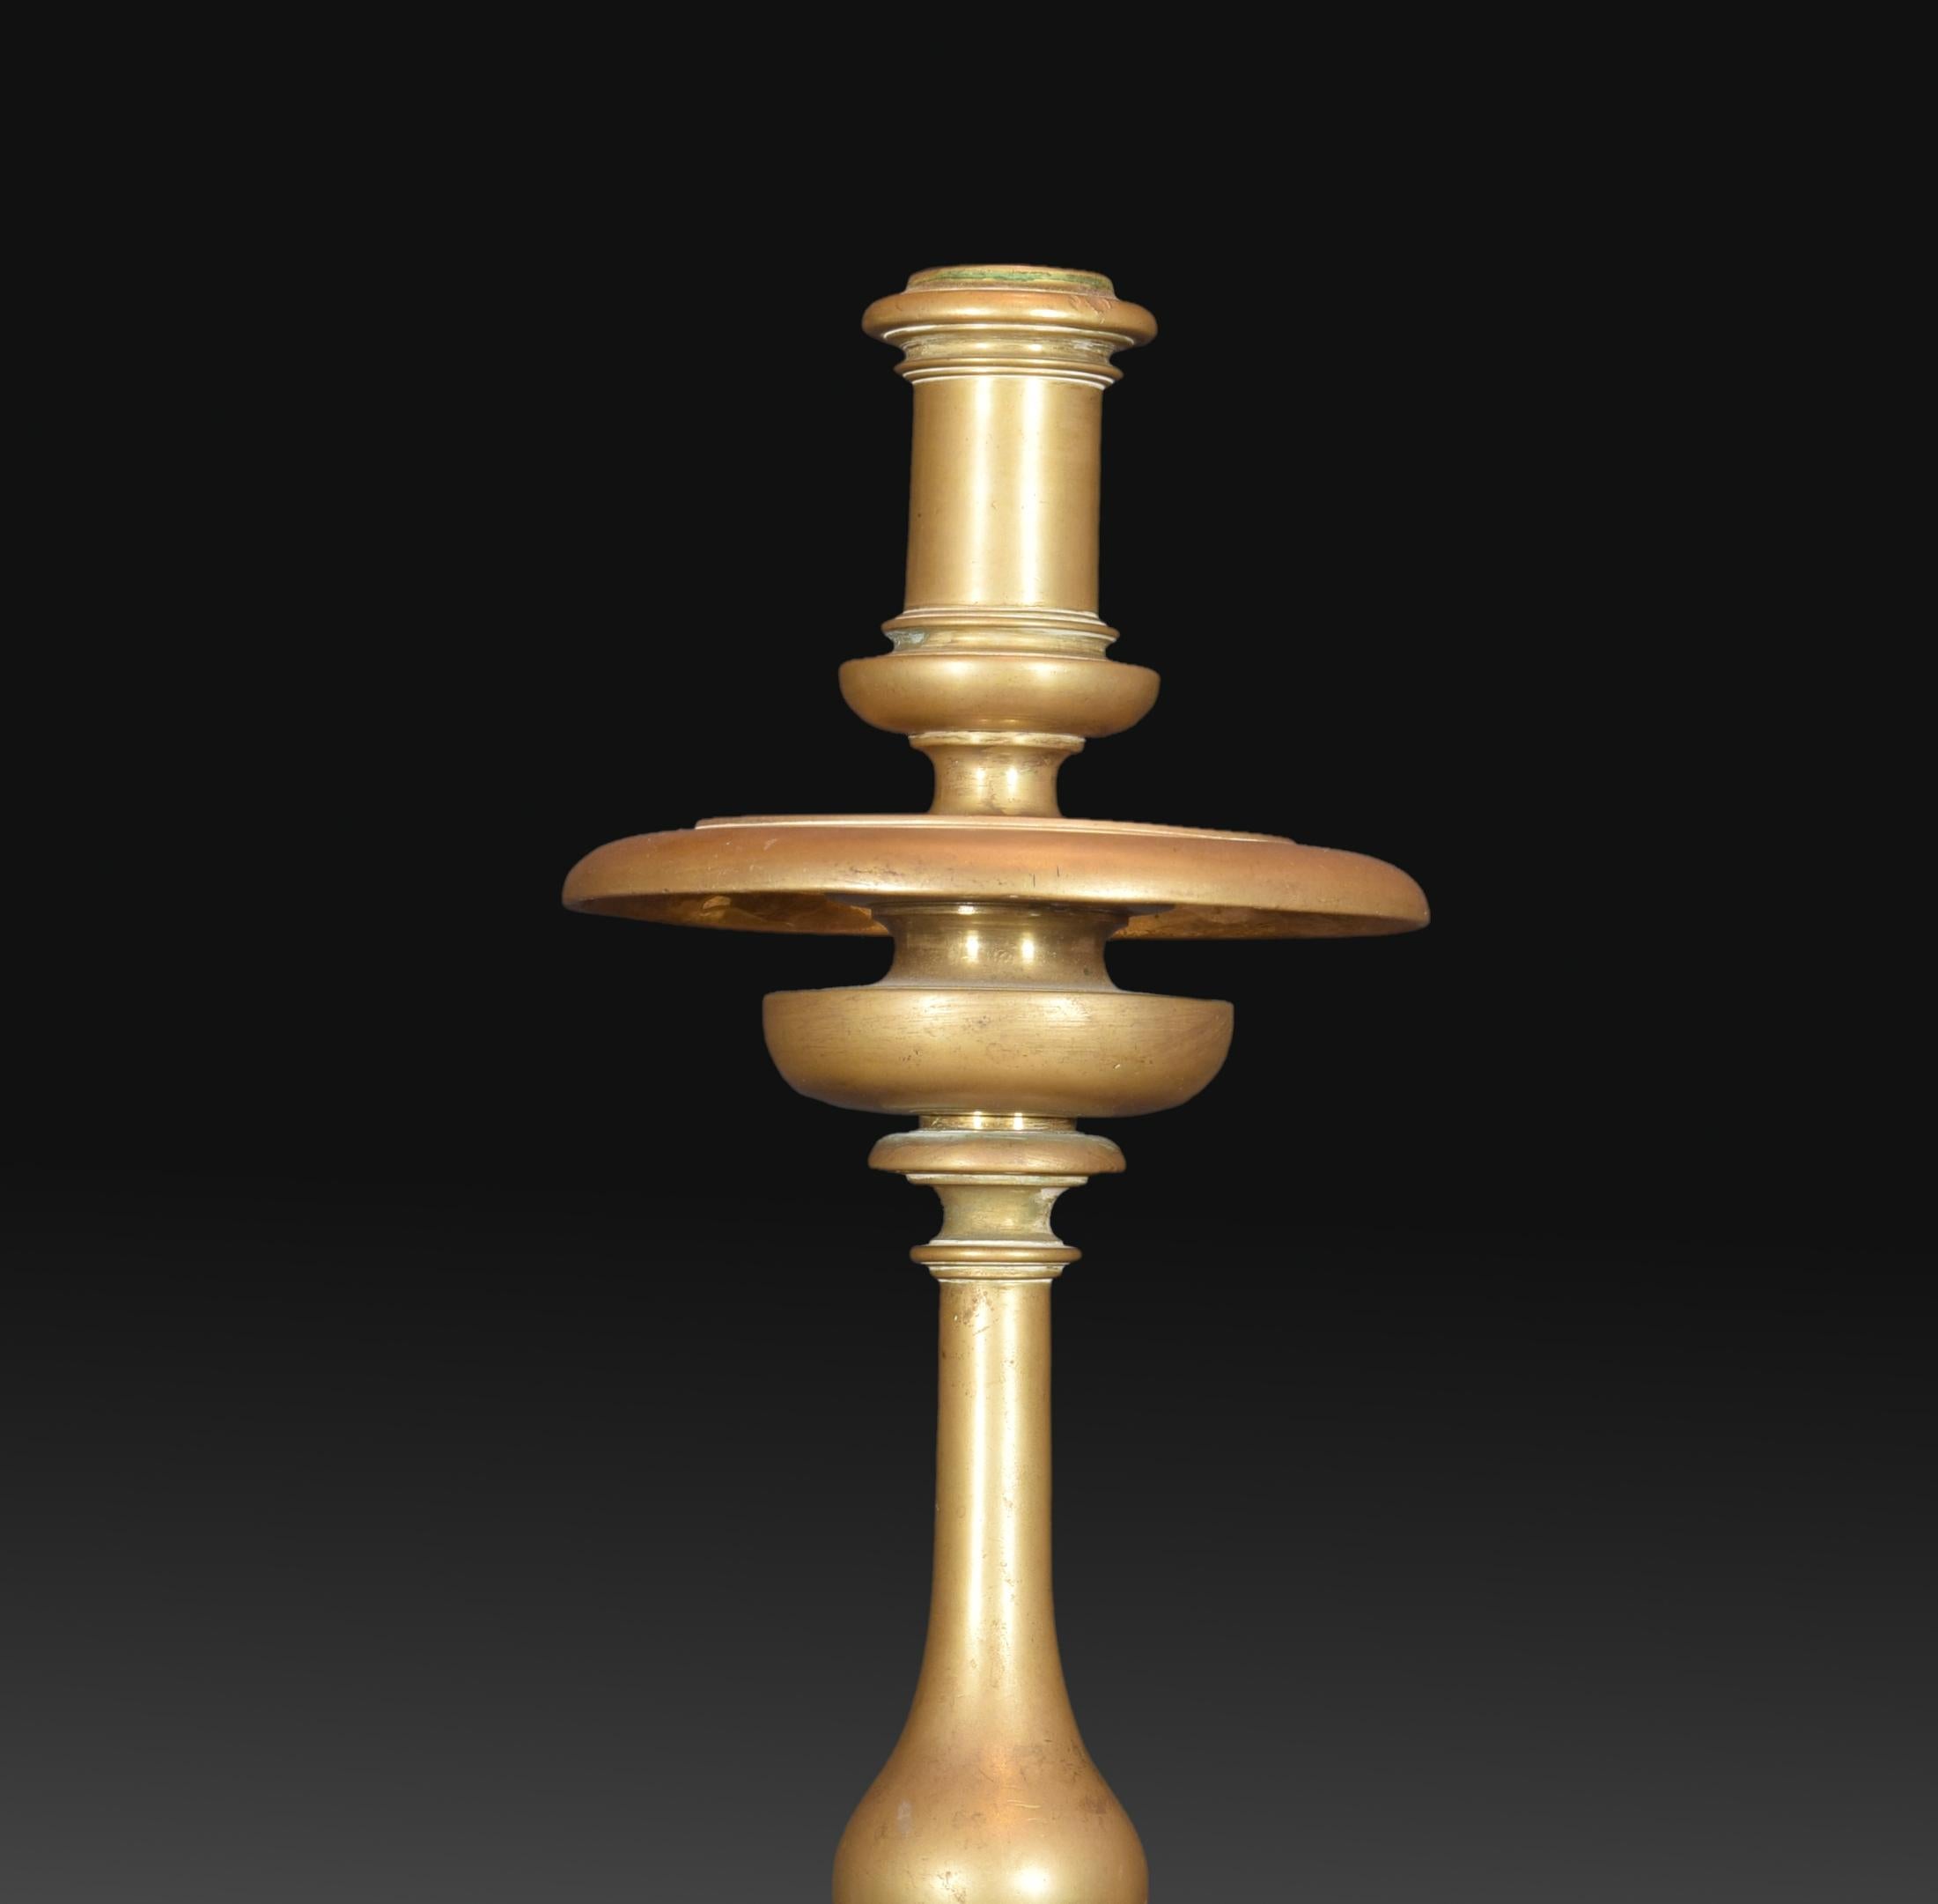 Candlestick. Bronze, XVII-XVIII centuries.
Candlestick made in bronze with circular base and shaft combining discs, balustrade shapes, smooth areas, concave and convex moldings of different widths, etc., created a very moved profile usual in this